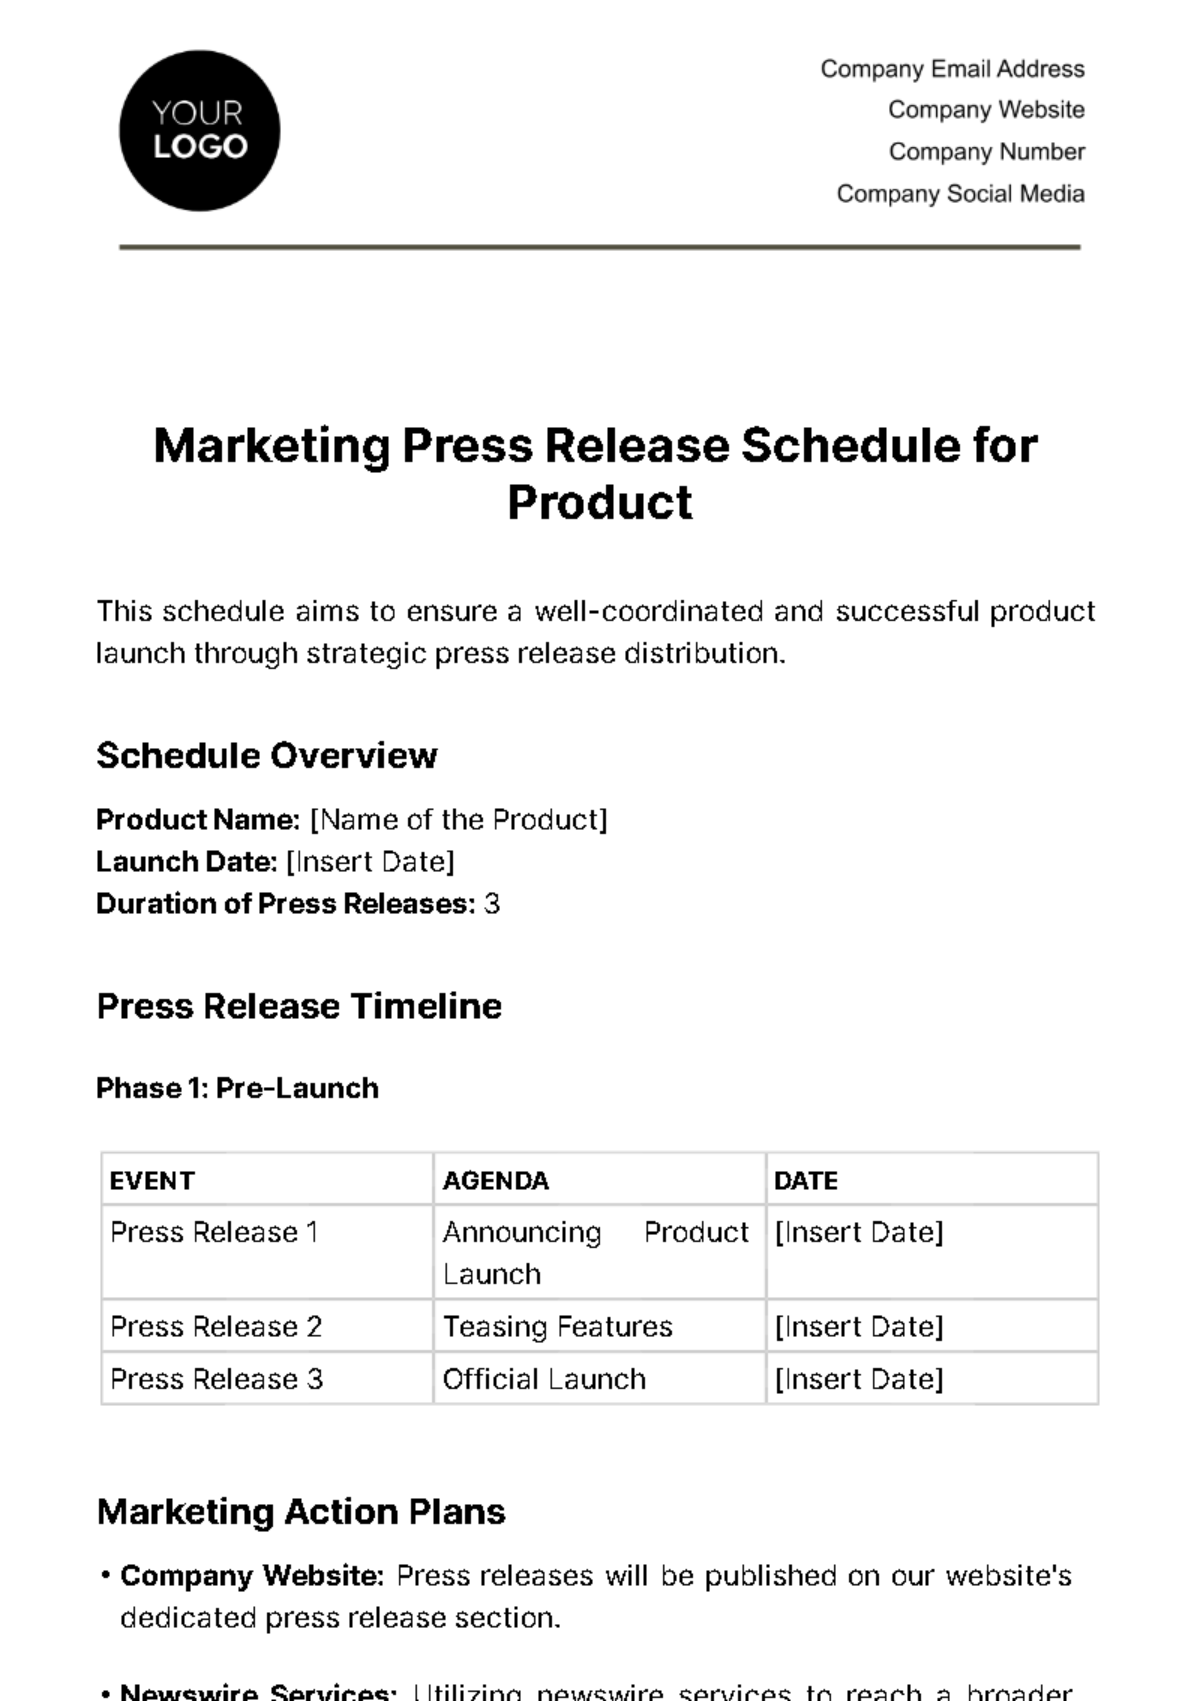 Free Marketing Press Release Schedule for Product Template